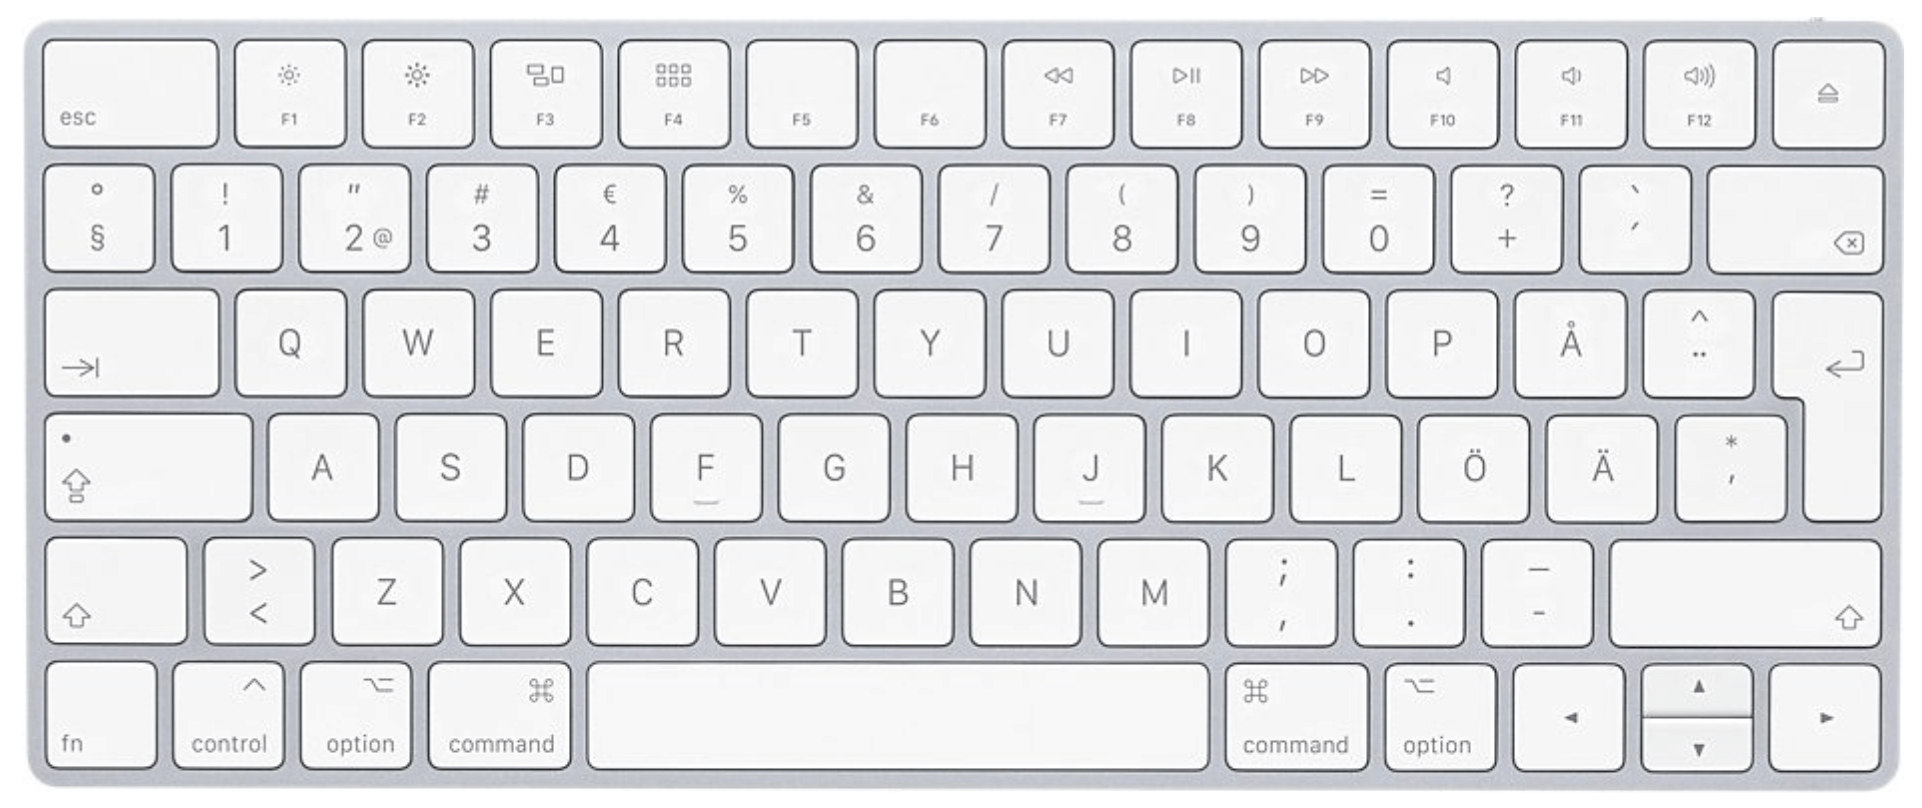 dybt fusionere Reporter Backslash and other special characters when using a Mac